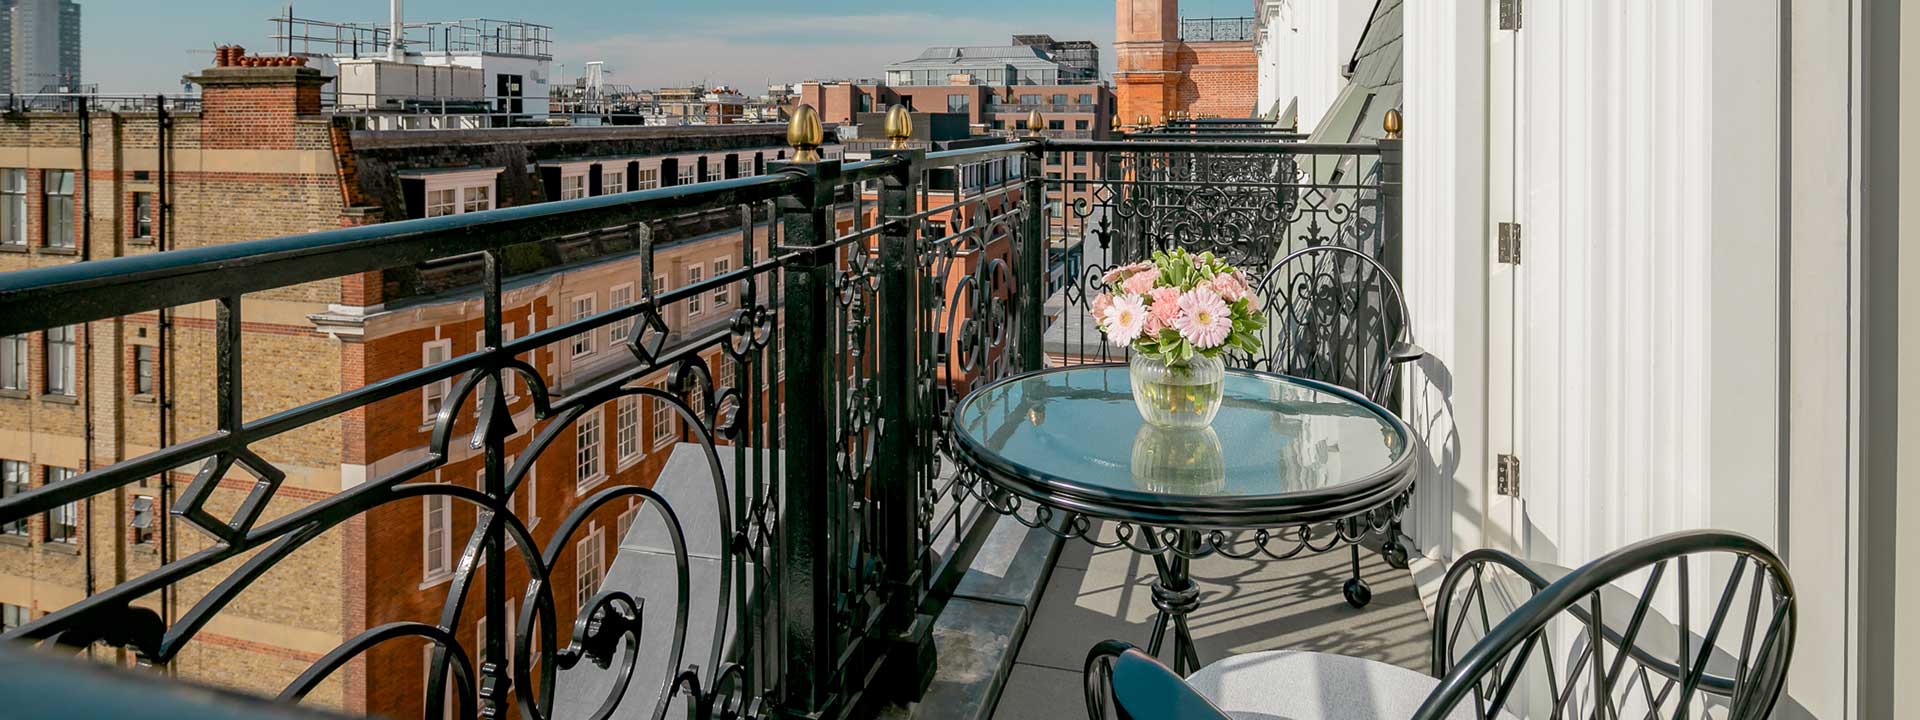 Enjoying the view on the terrace from the Mayfair Balcony Room, on comfortable chairs and with flower arrangements.